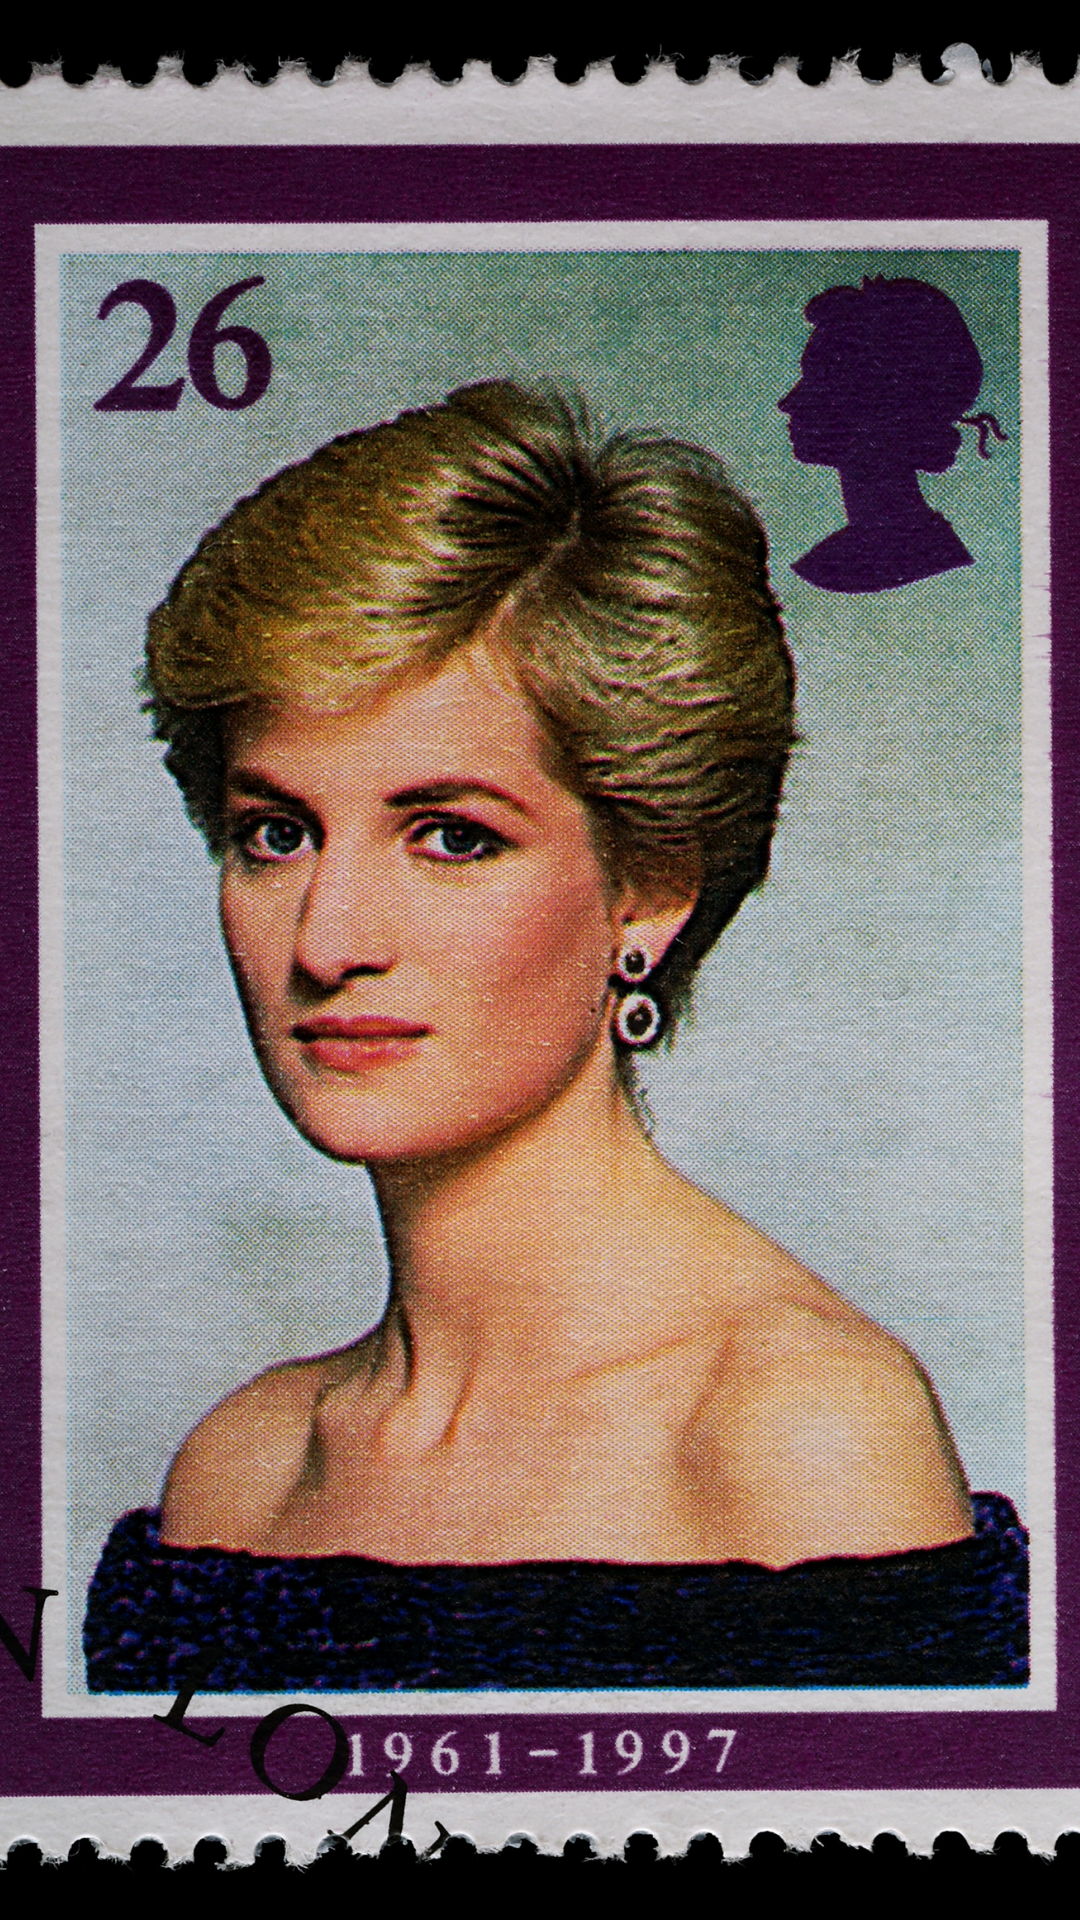 Her Story in Stamps PRINCESS OF WALES DIANA COLLECTION 